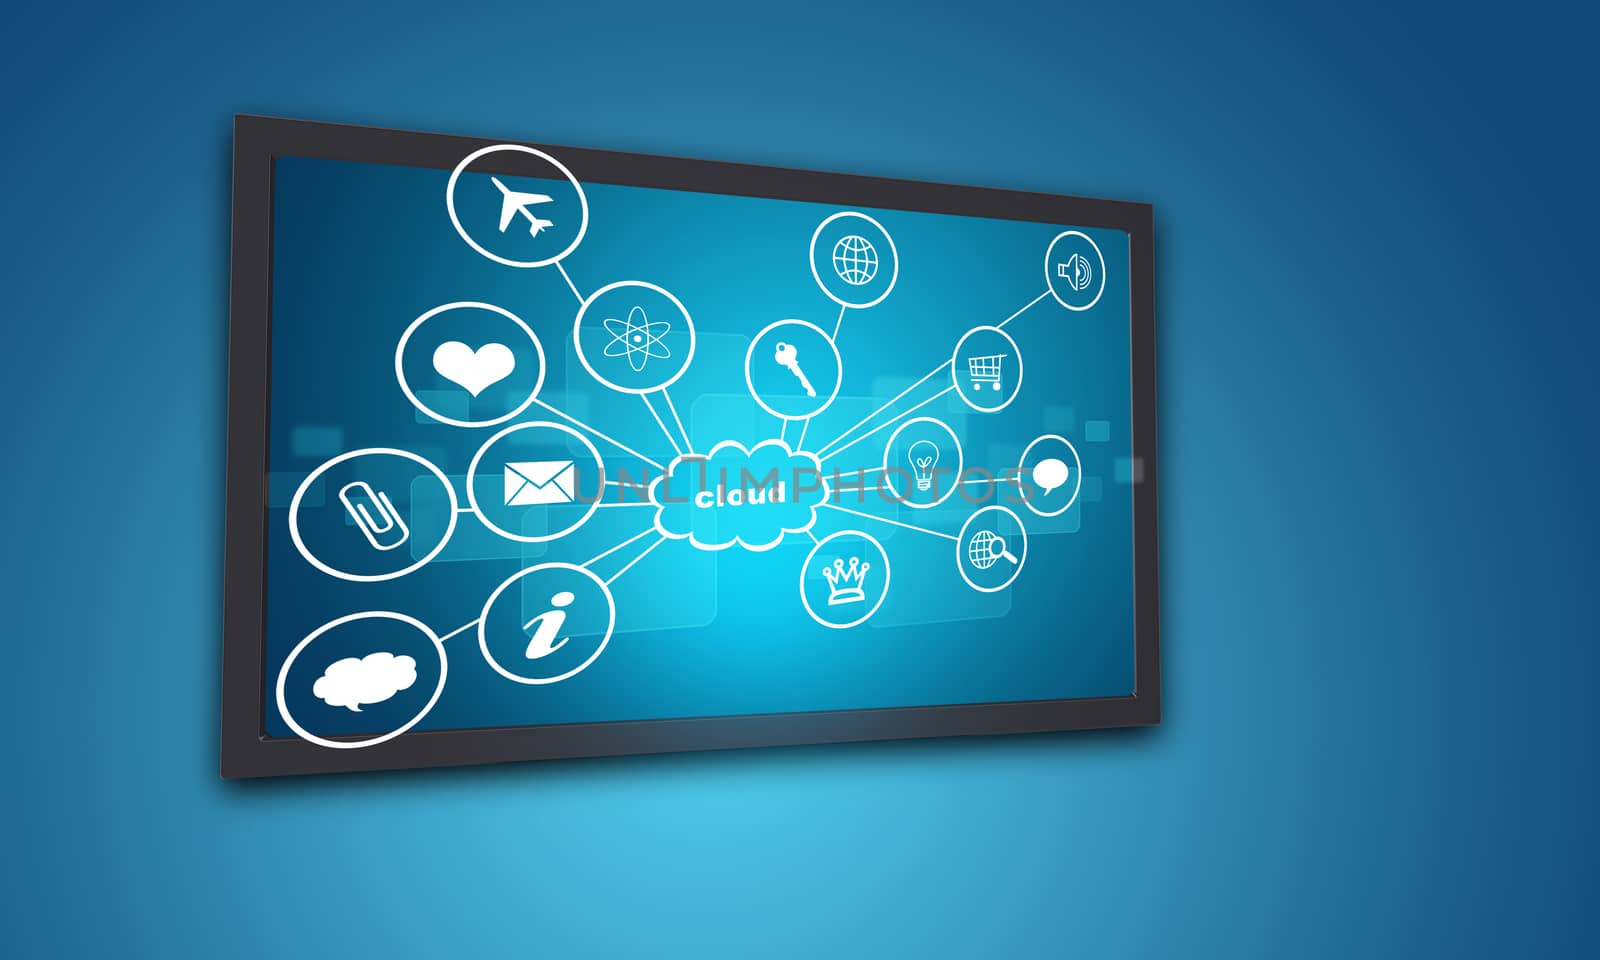 Touchscreen display with icons, on blue background. Element of this image furnished by NASA